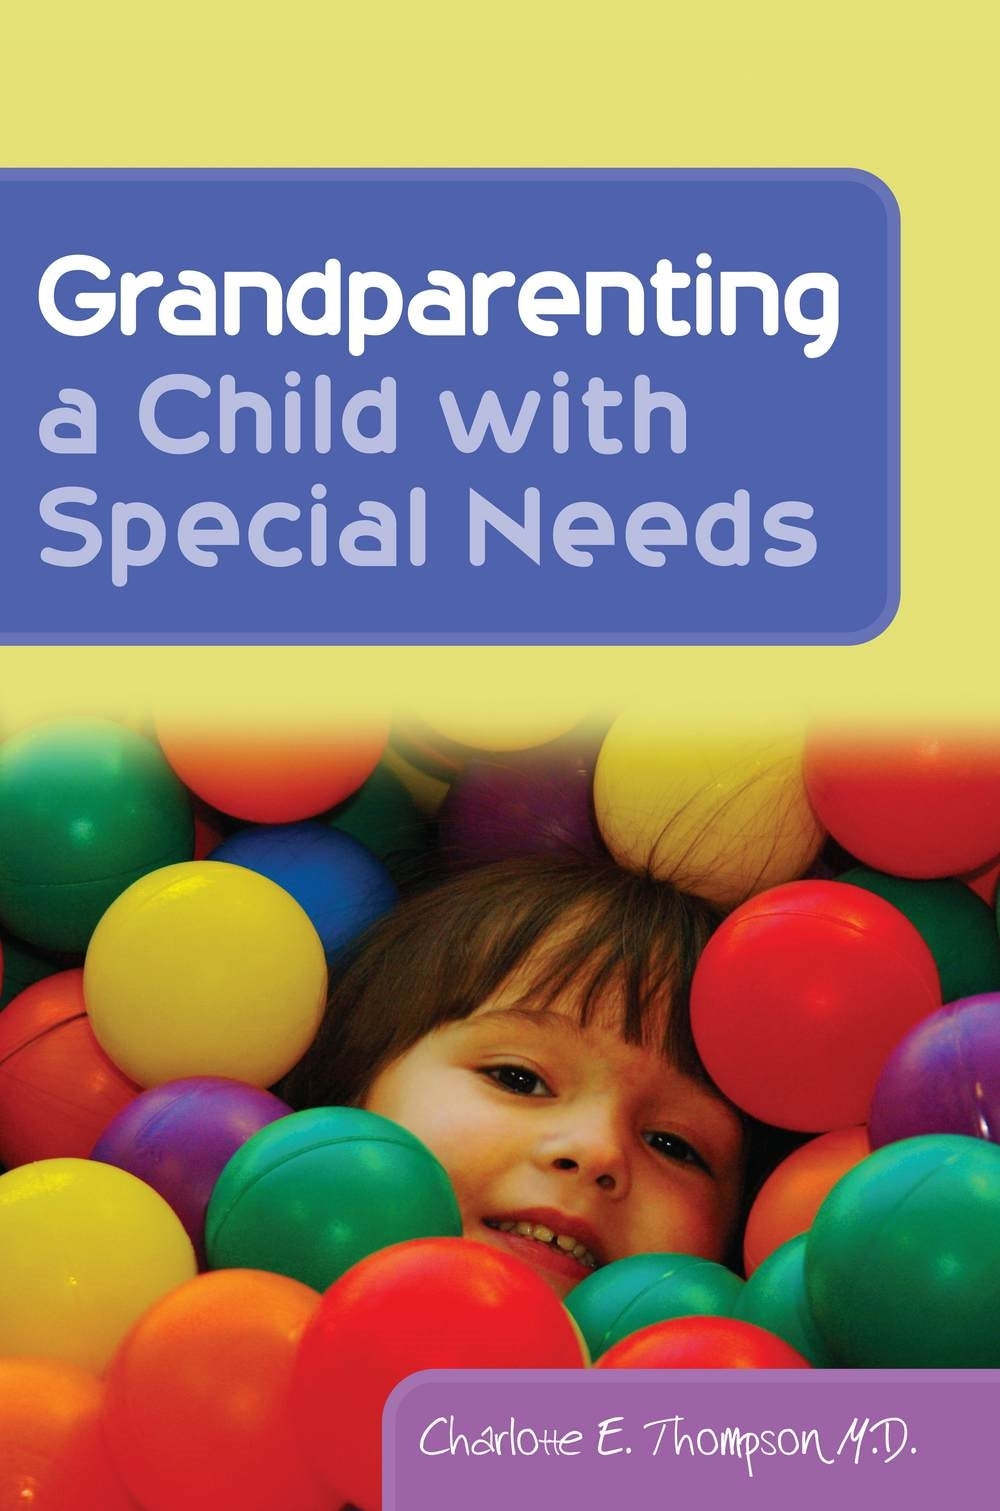 Grandparenting a Child with Special Needs by Charlotte Thompson